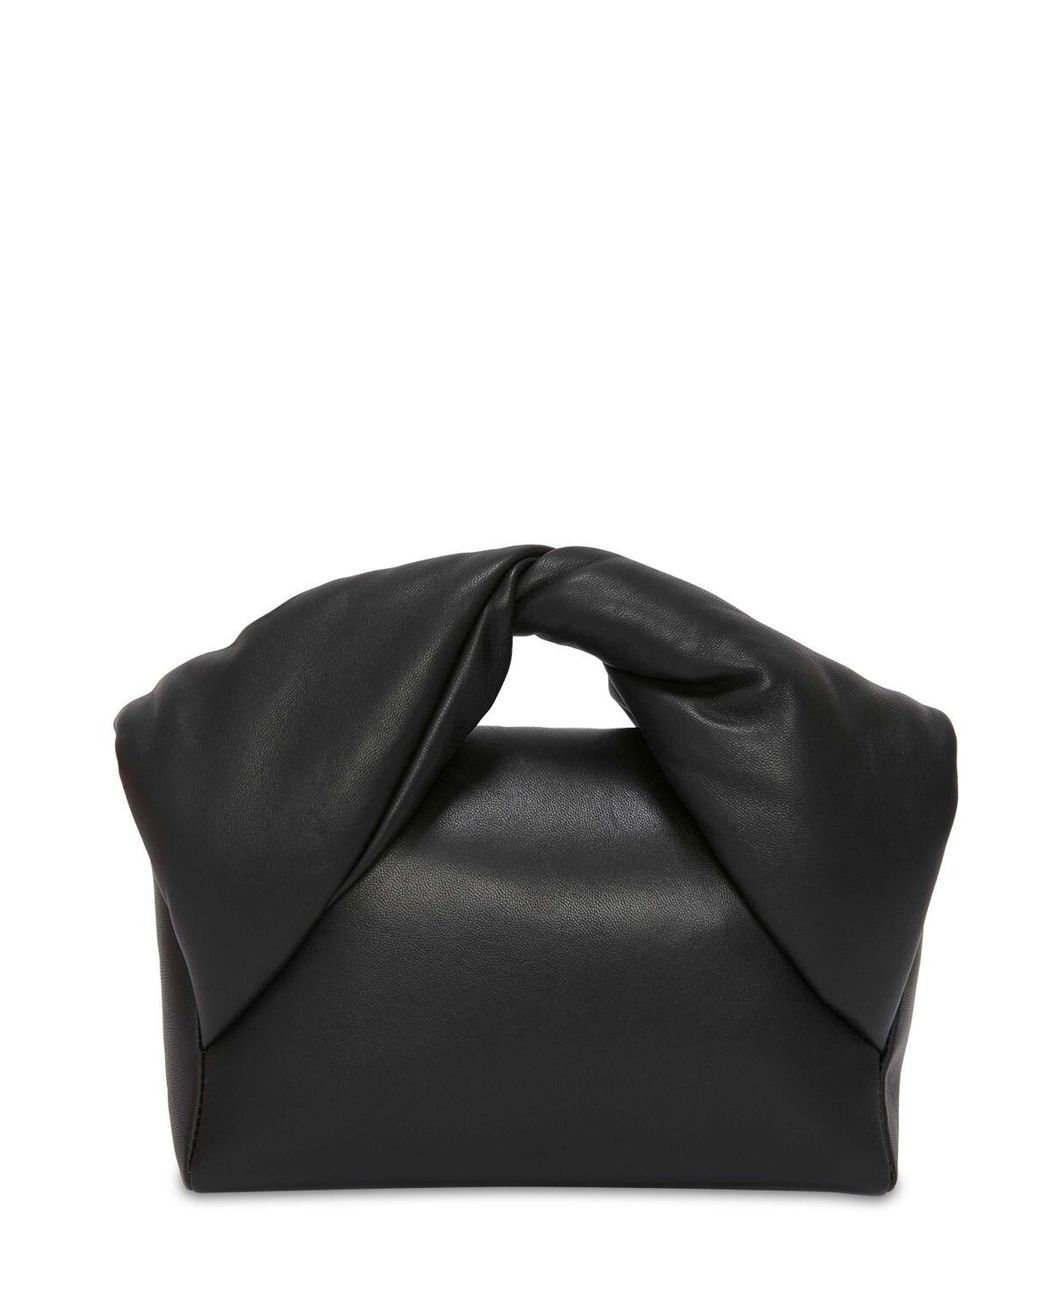 JW Anderson Mini Twister Leather Top Handle Bag in Black | Lyst